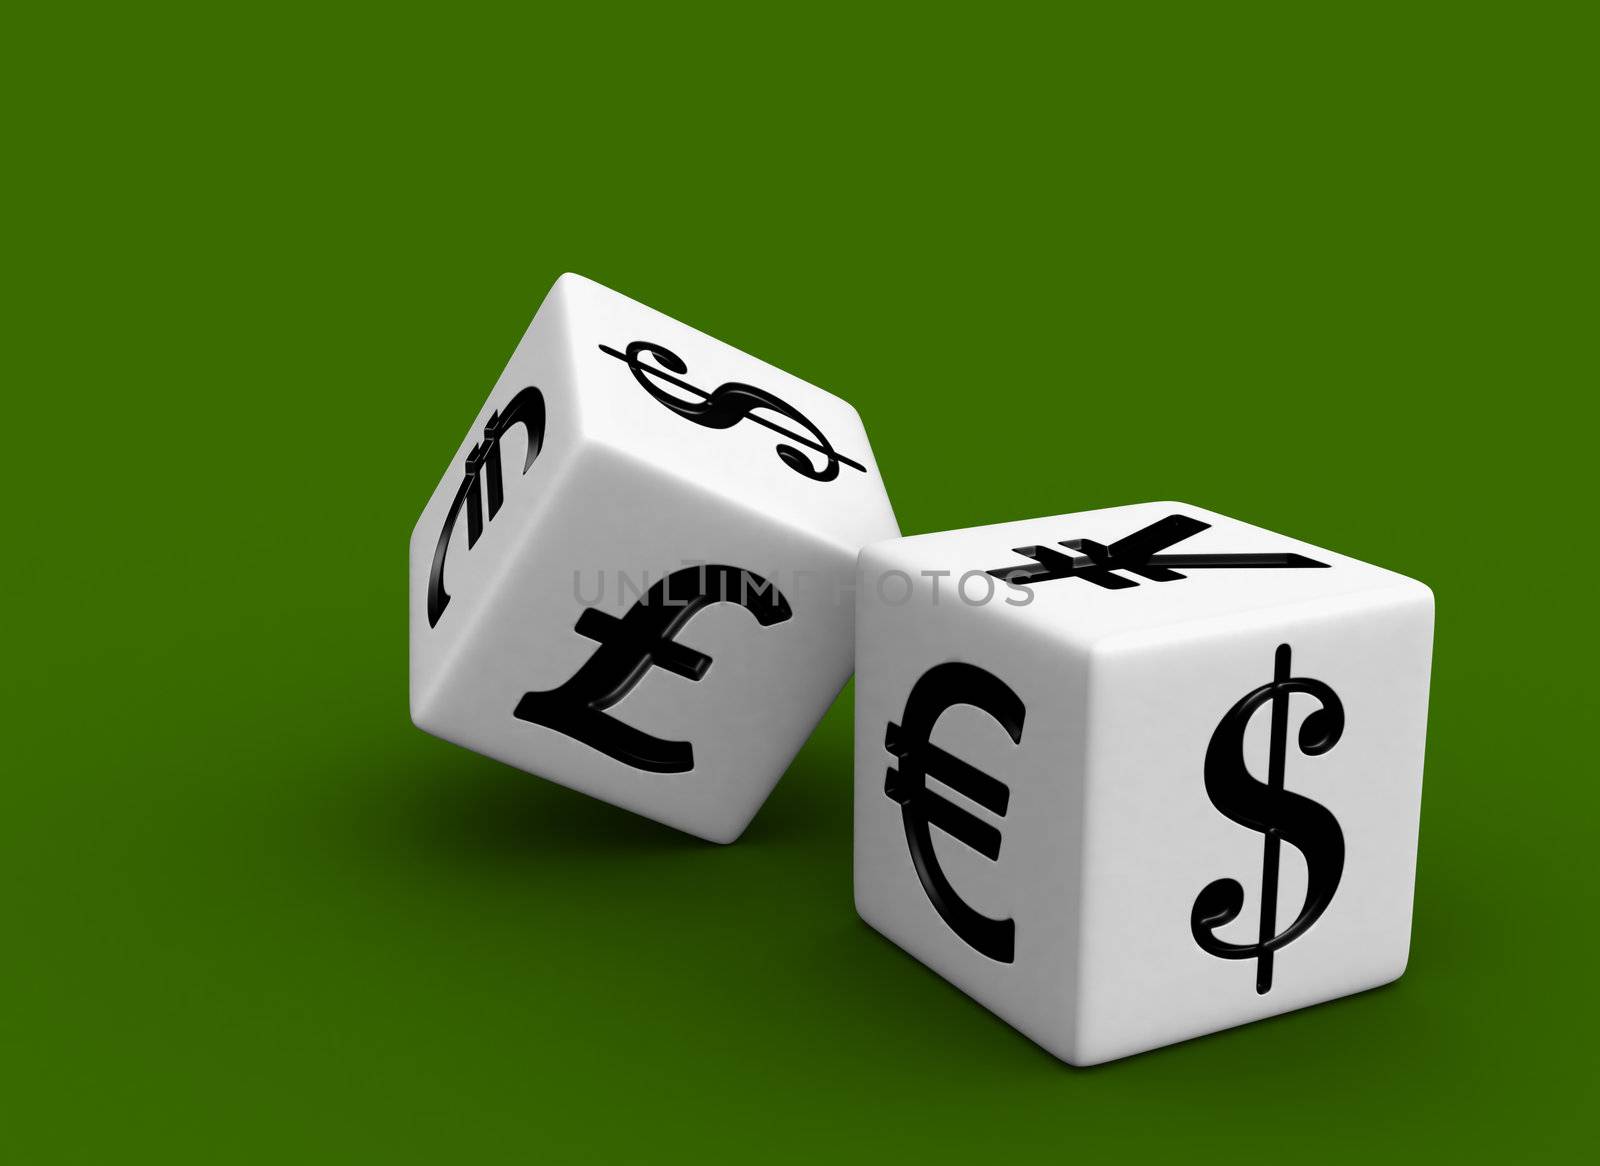 Photo-real illustration of two white dice engraved with US Dollar, Yen, Euro and Pound currency symbols on green background.